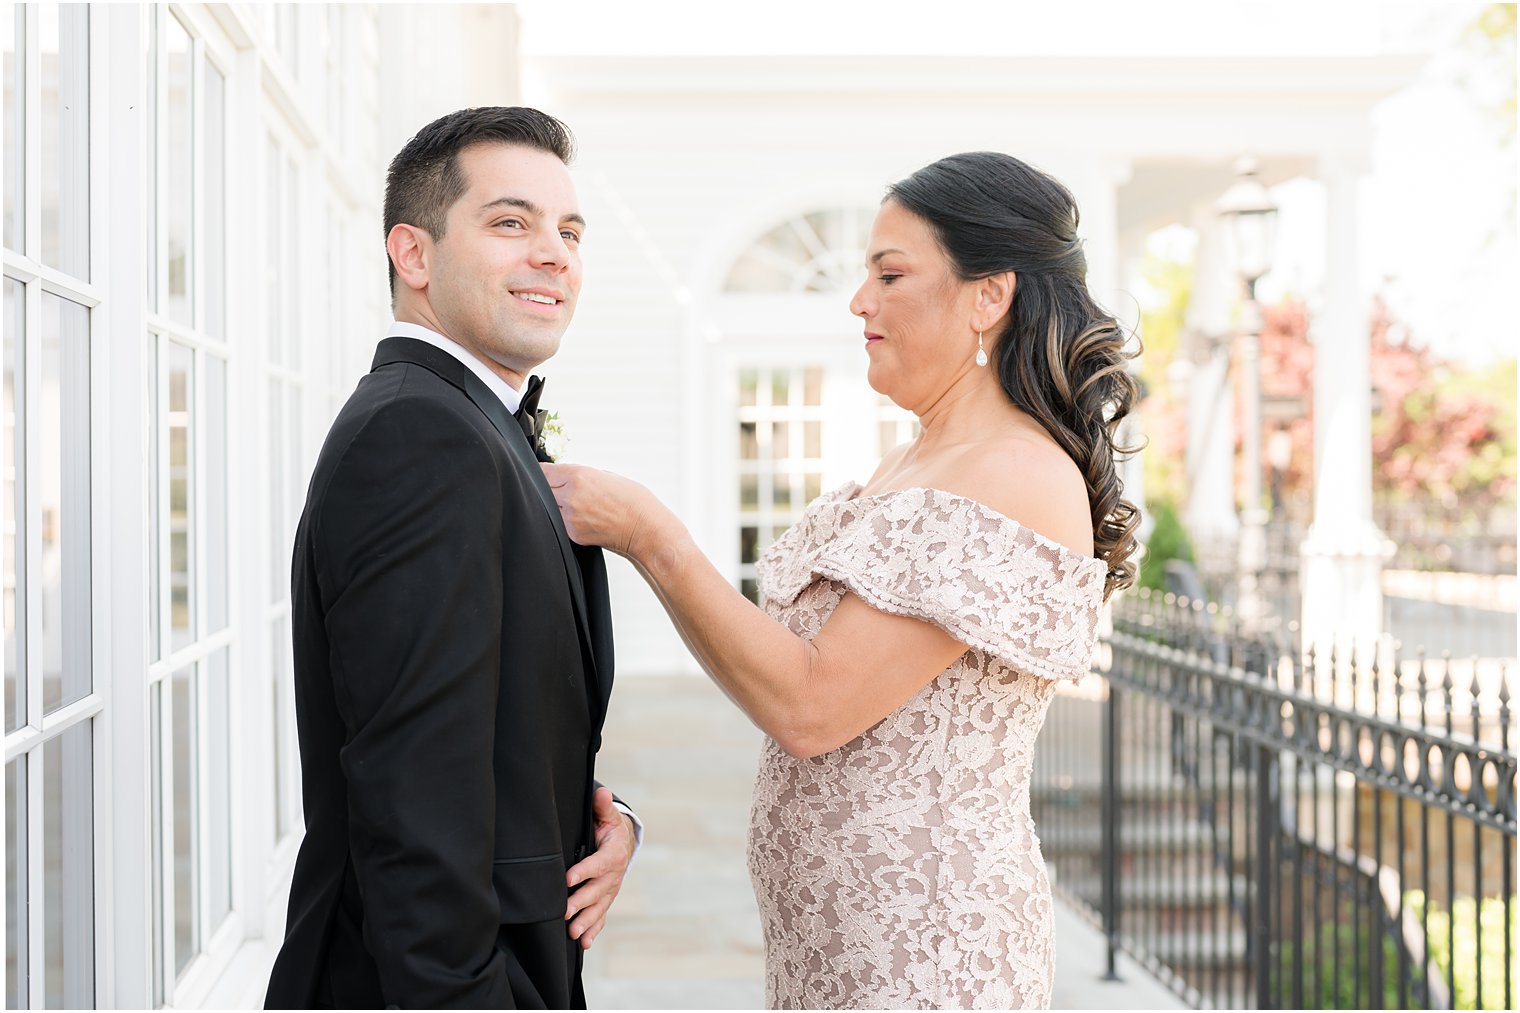 tips for including mom in wedding day photos: mom helping son with tie and boutonniere